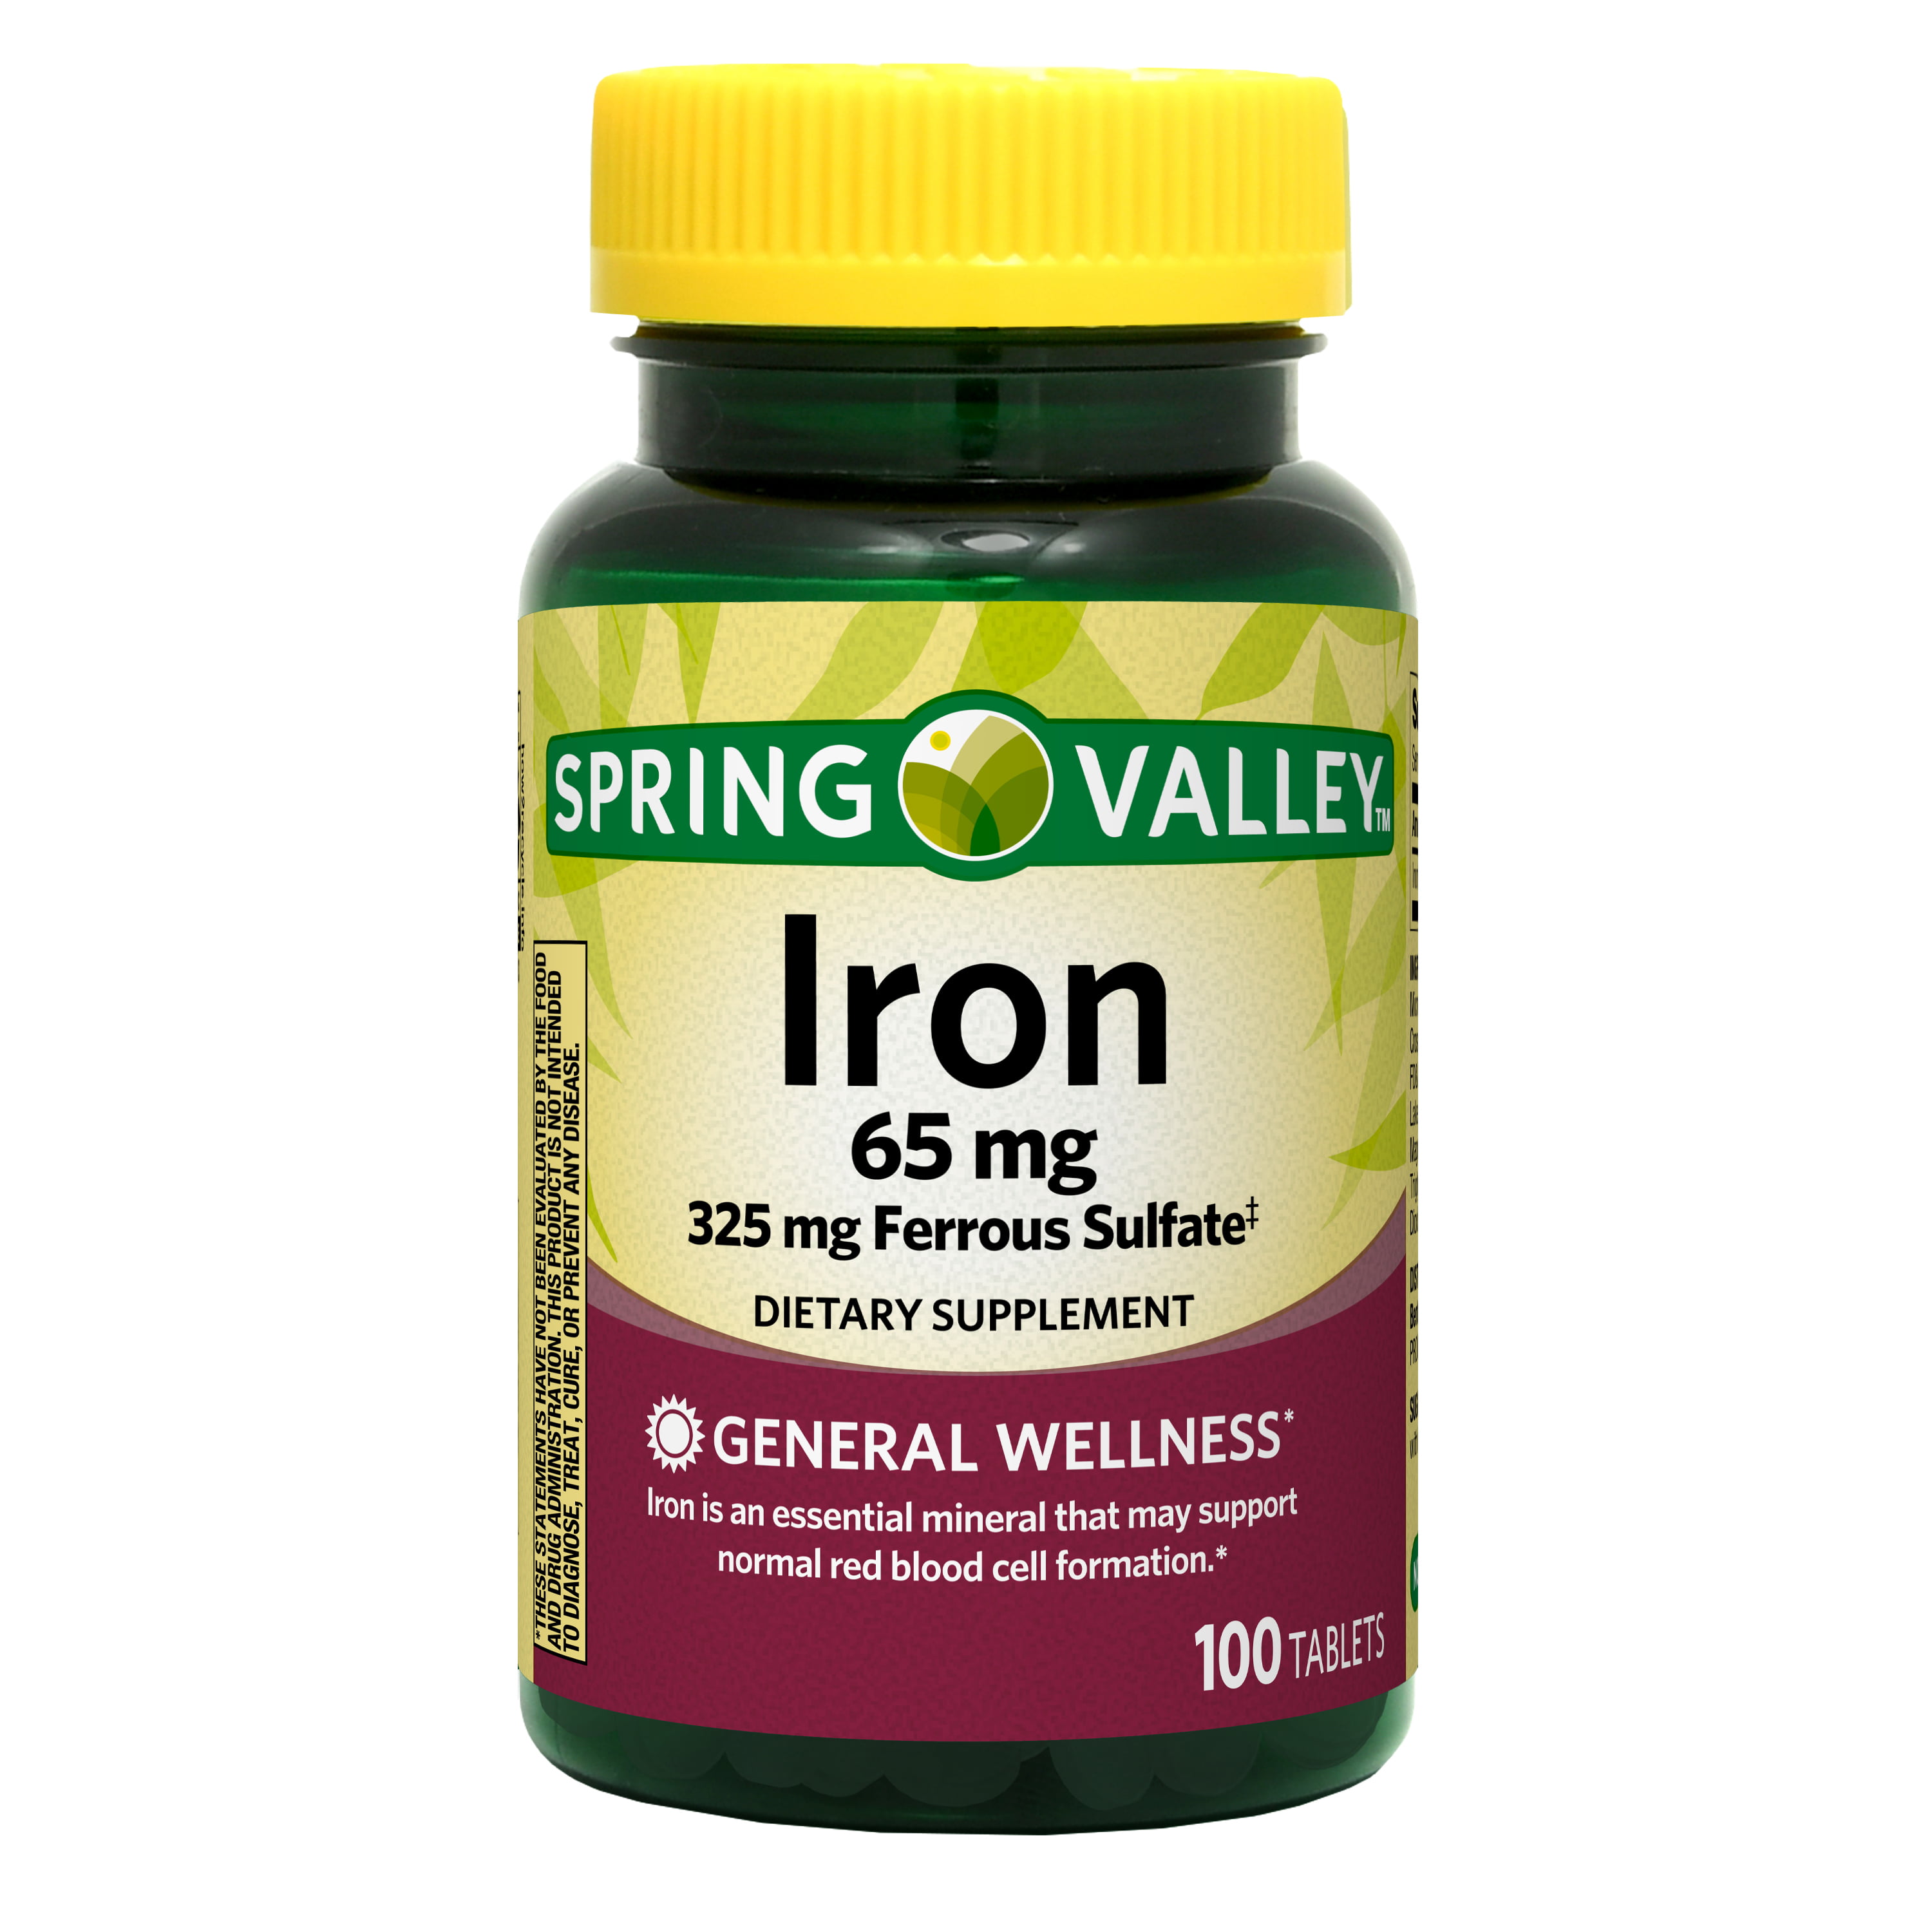 Spring Valley Iron Tablets Dietary Supplement, 65 mg, 100 Count